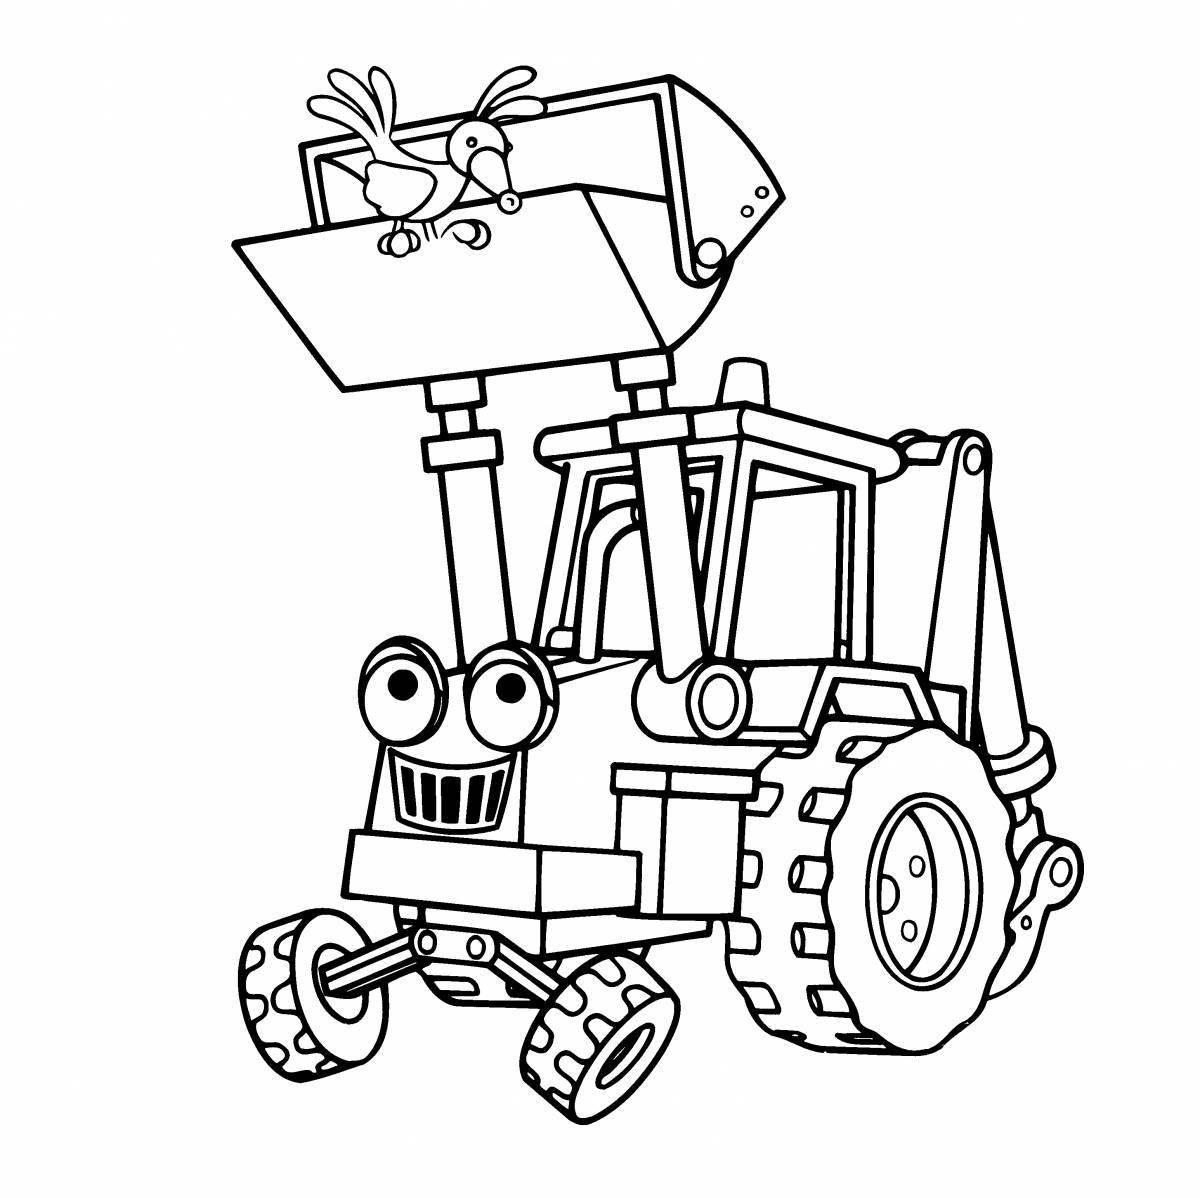 Glittering kids tractor coloring page